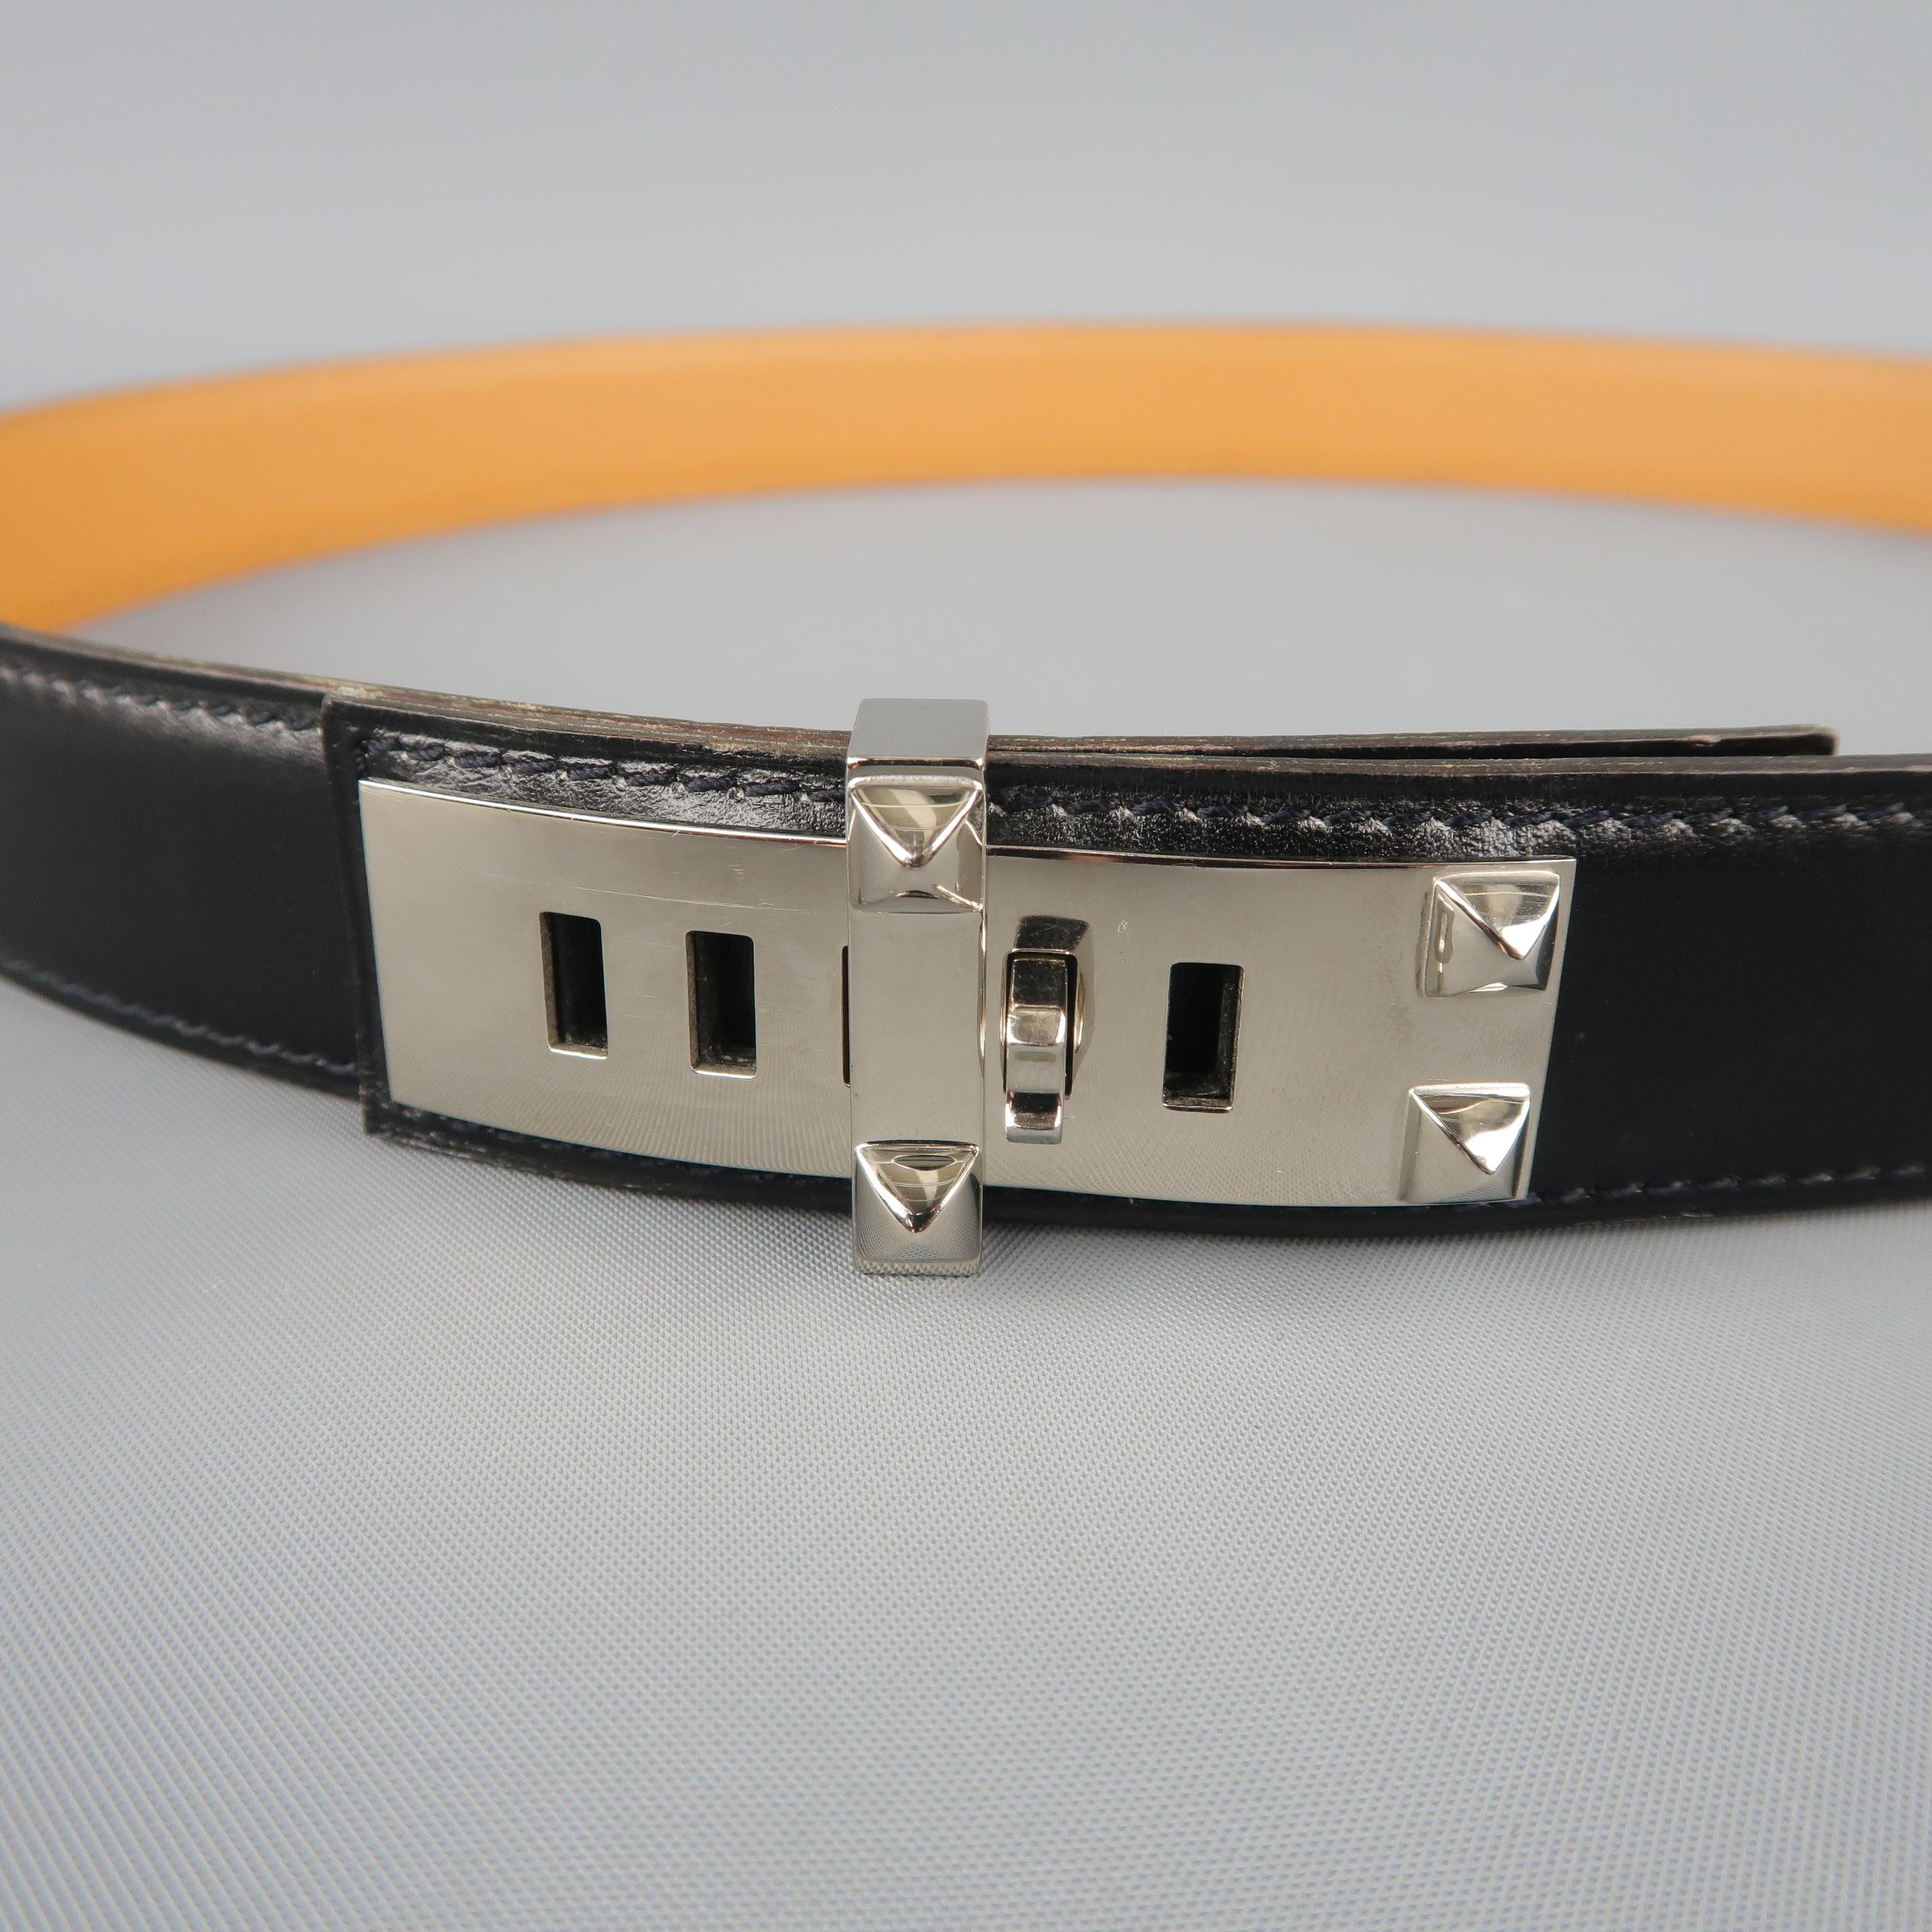 HERMES Collier de Chien Belt  comes in smooth black leather with tan leather liner and polished silver tone metal studded detail hardware. Very minor wear. With dust bag. Made in France.
 
Good Pre-Owned Condition.
Marked: 90
 
Length: 38.25